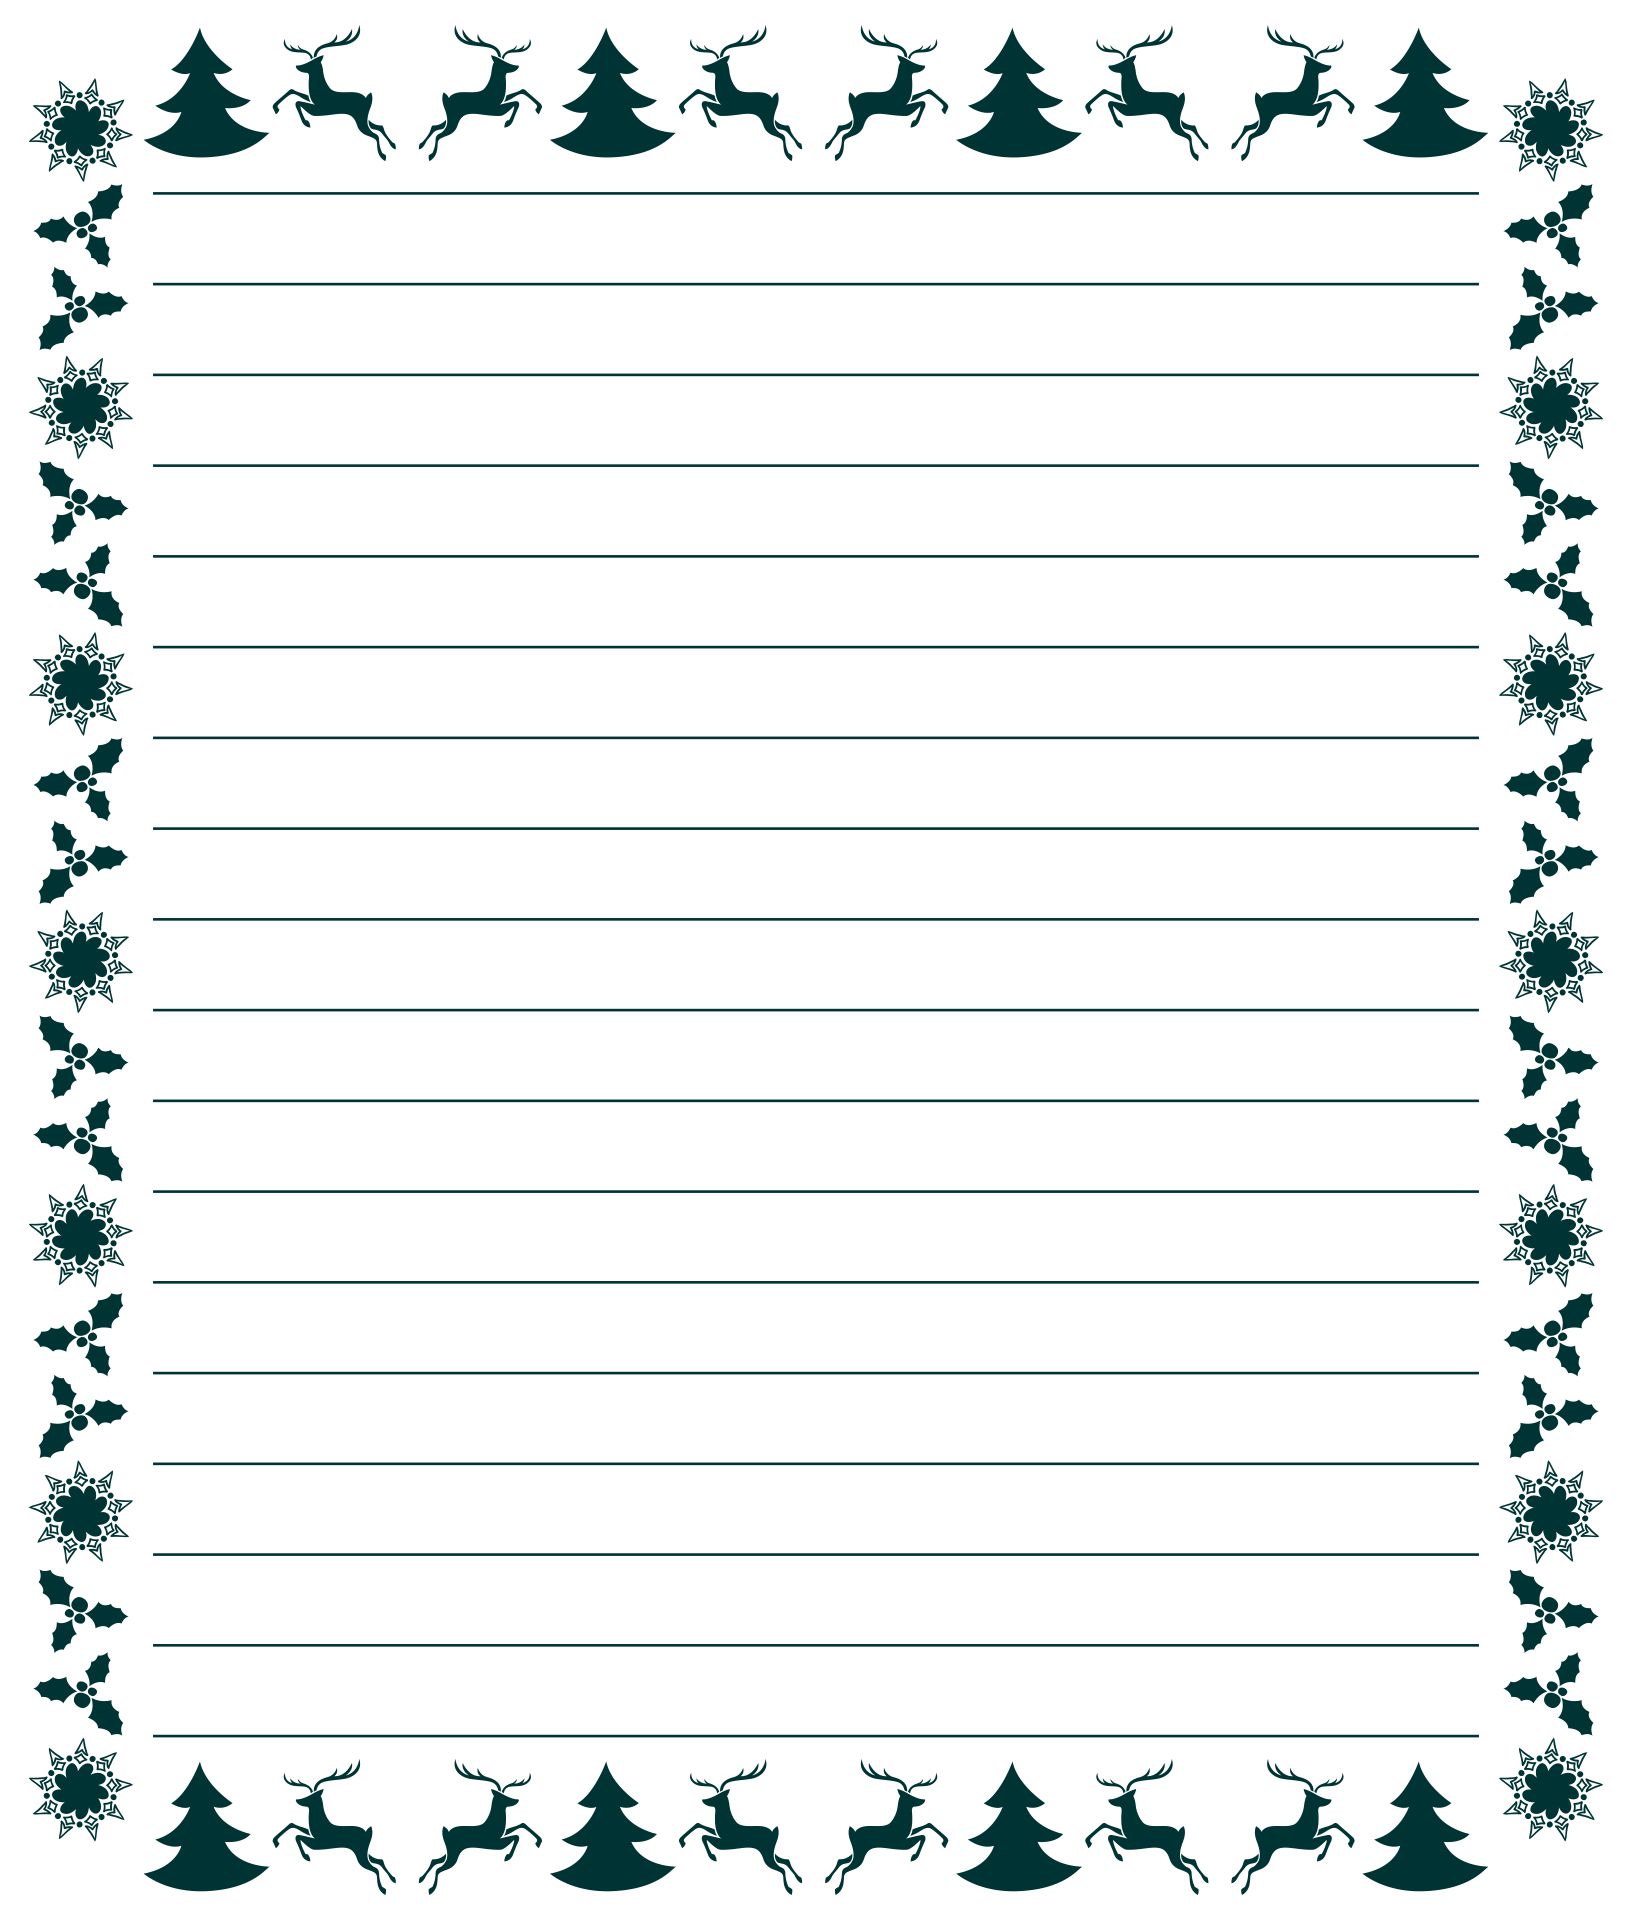 5-best-images-of-free-printable-christmas-border-lined-writing-paper